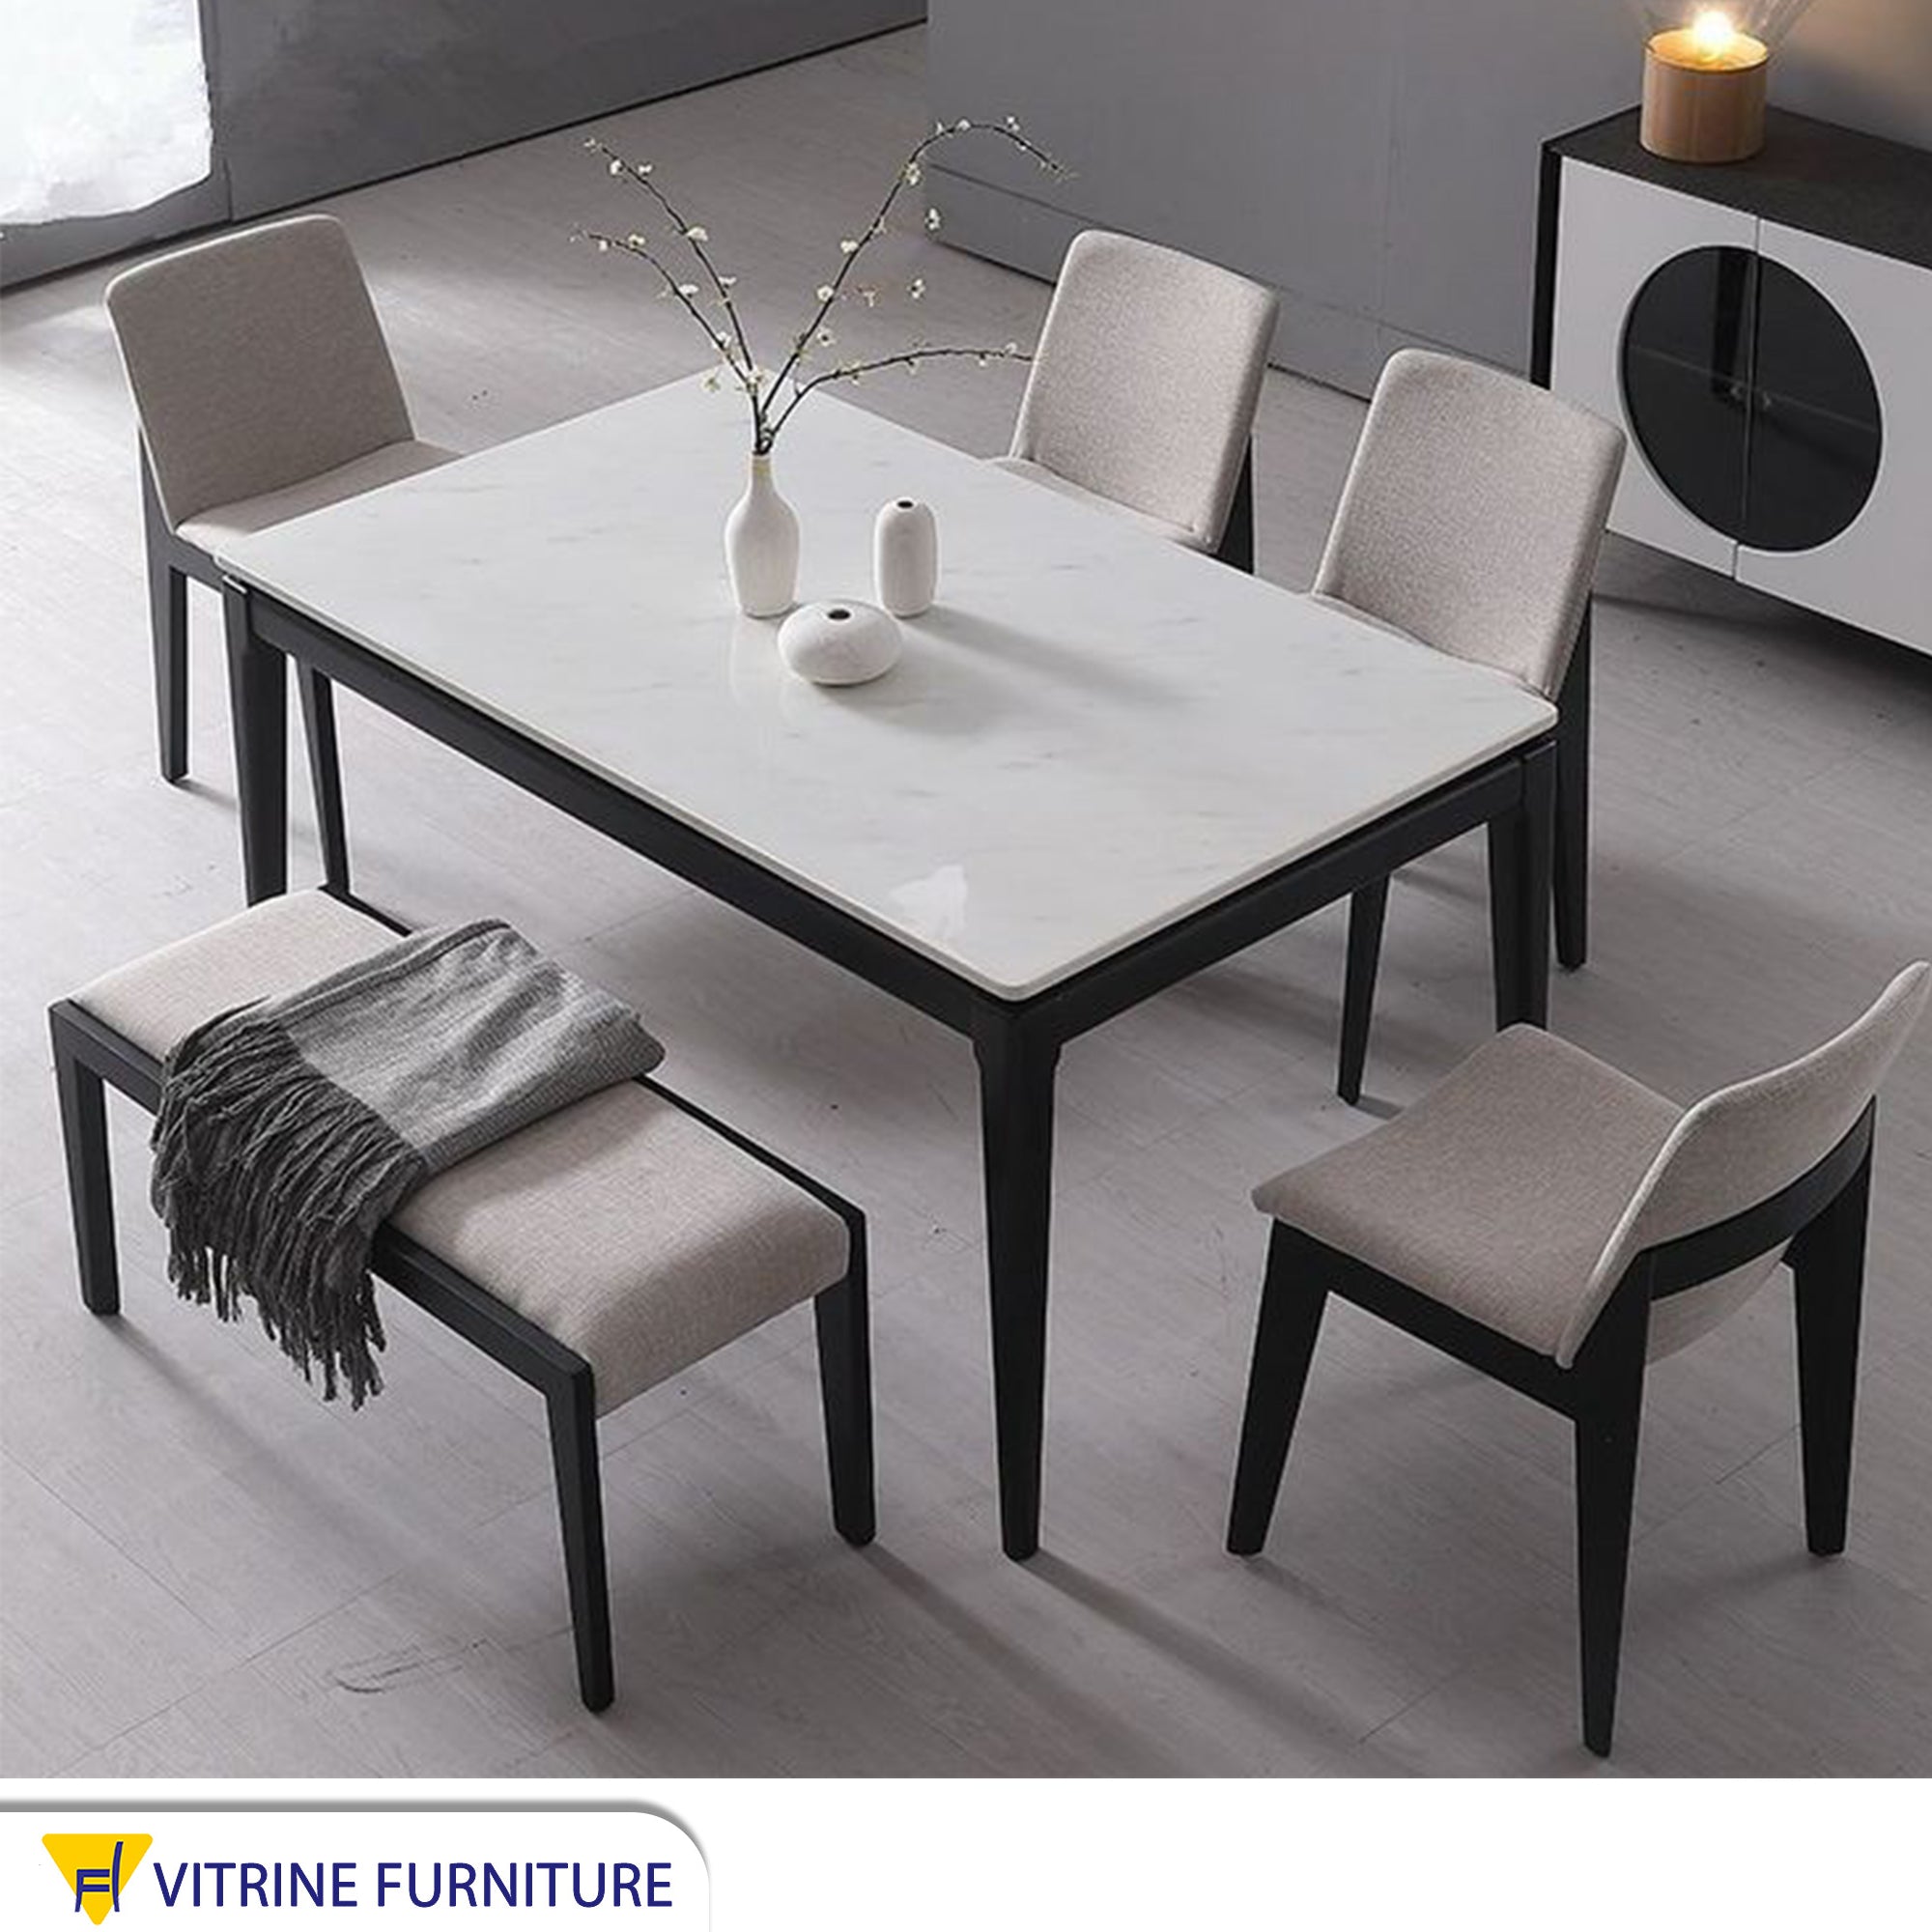 A modern and simple dining table design